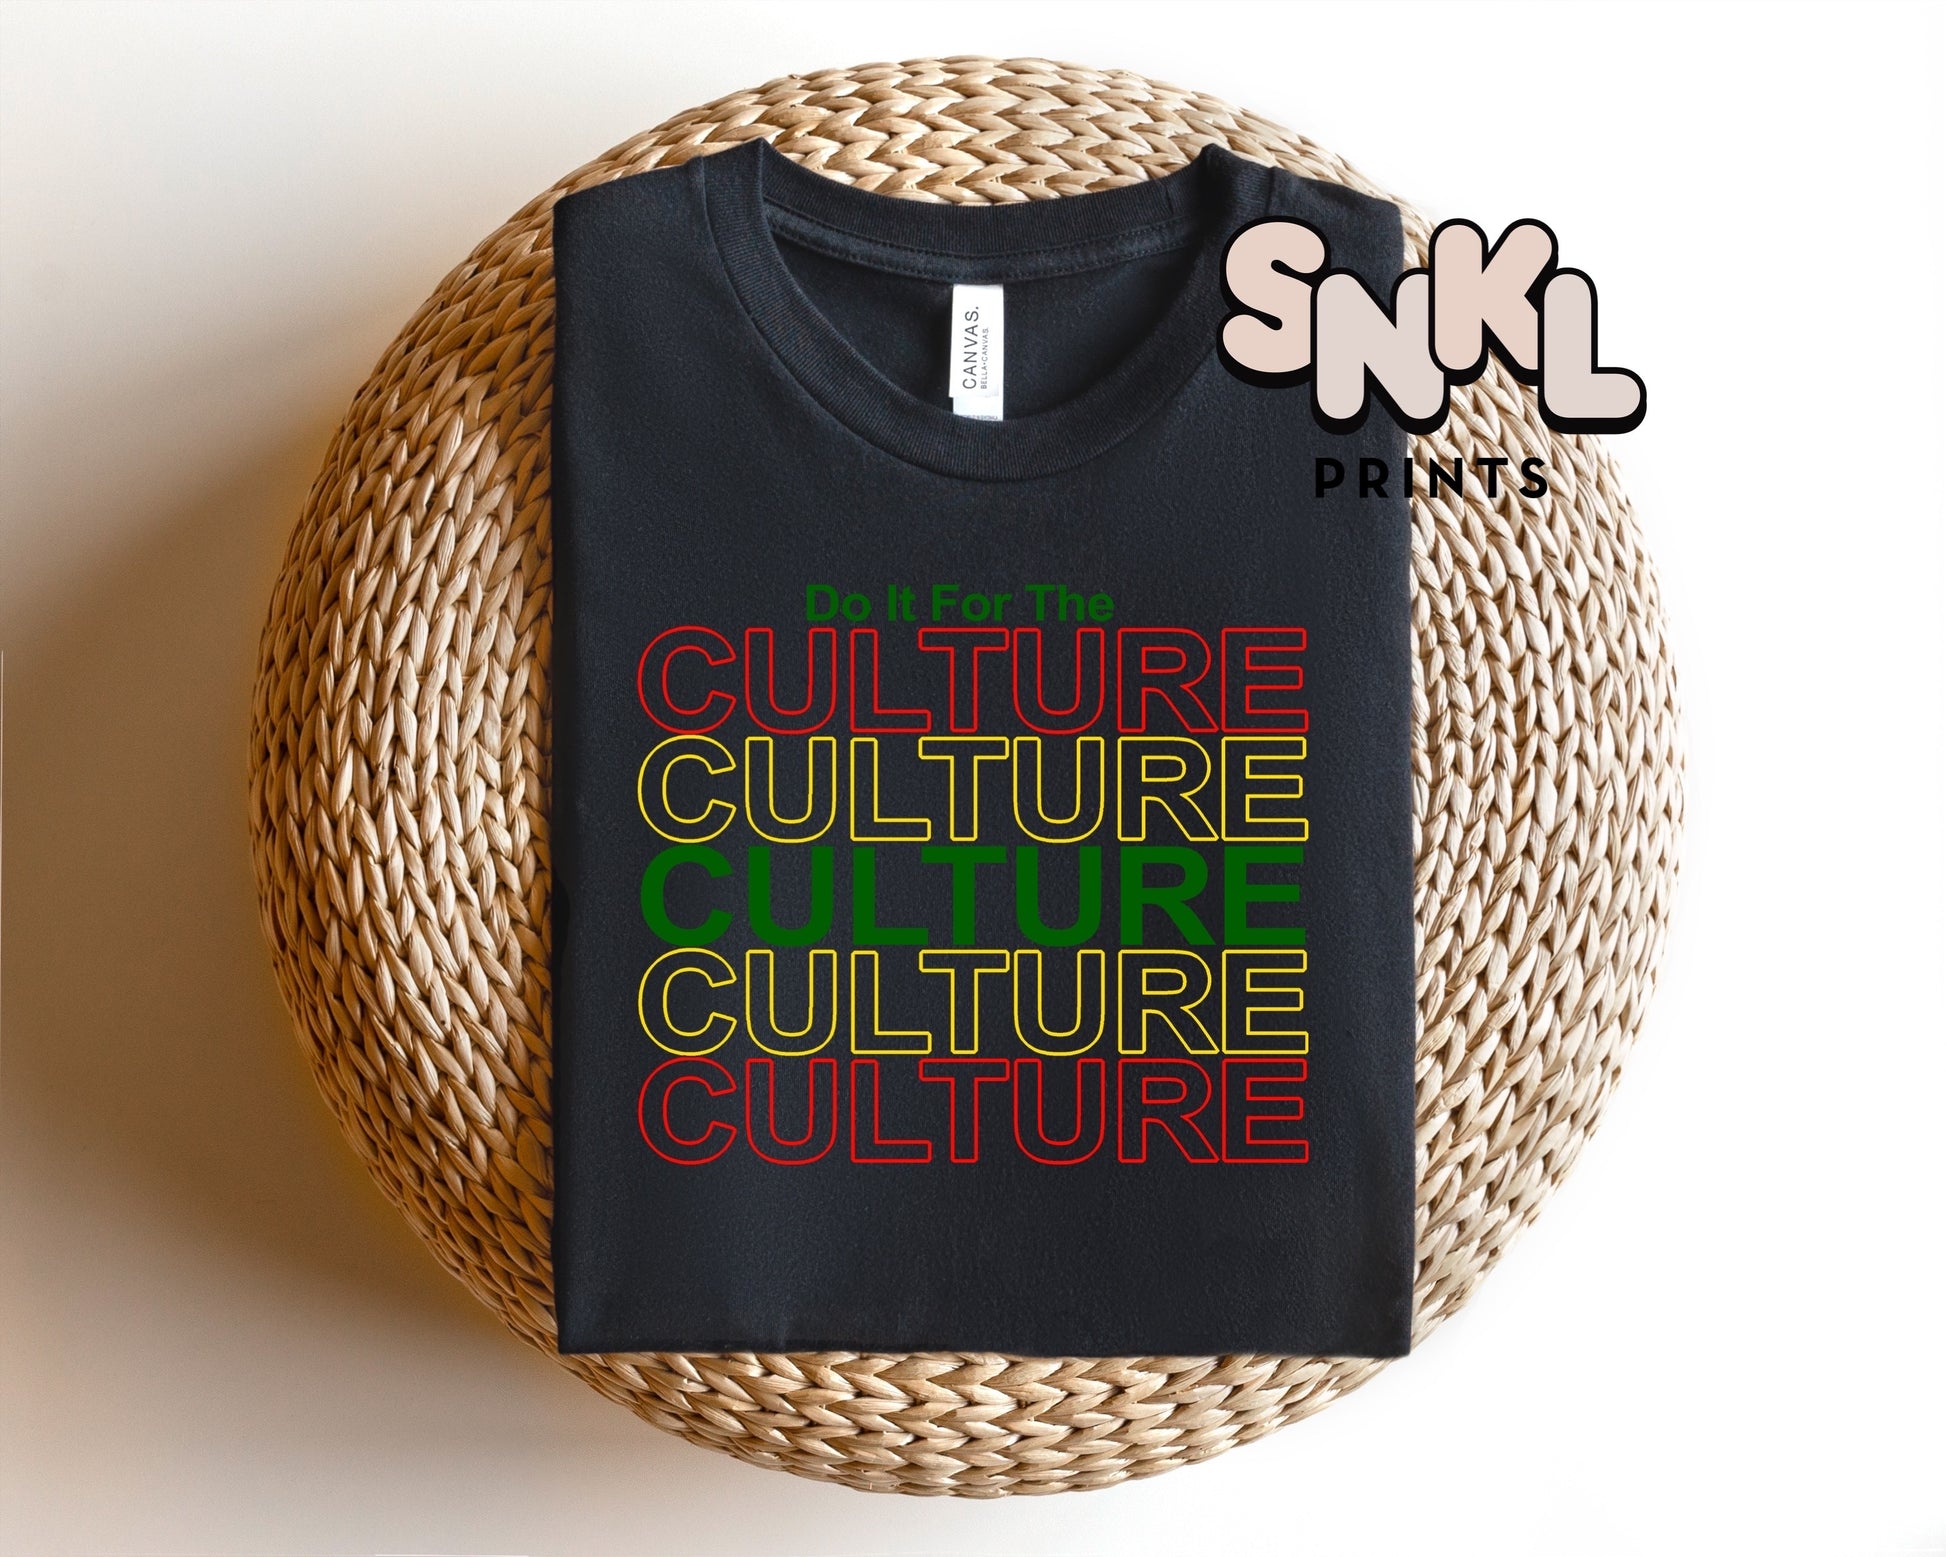 Do it for the Culture DTF Heat Transfer - SNKL Prints